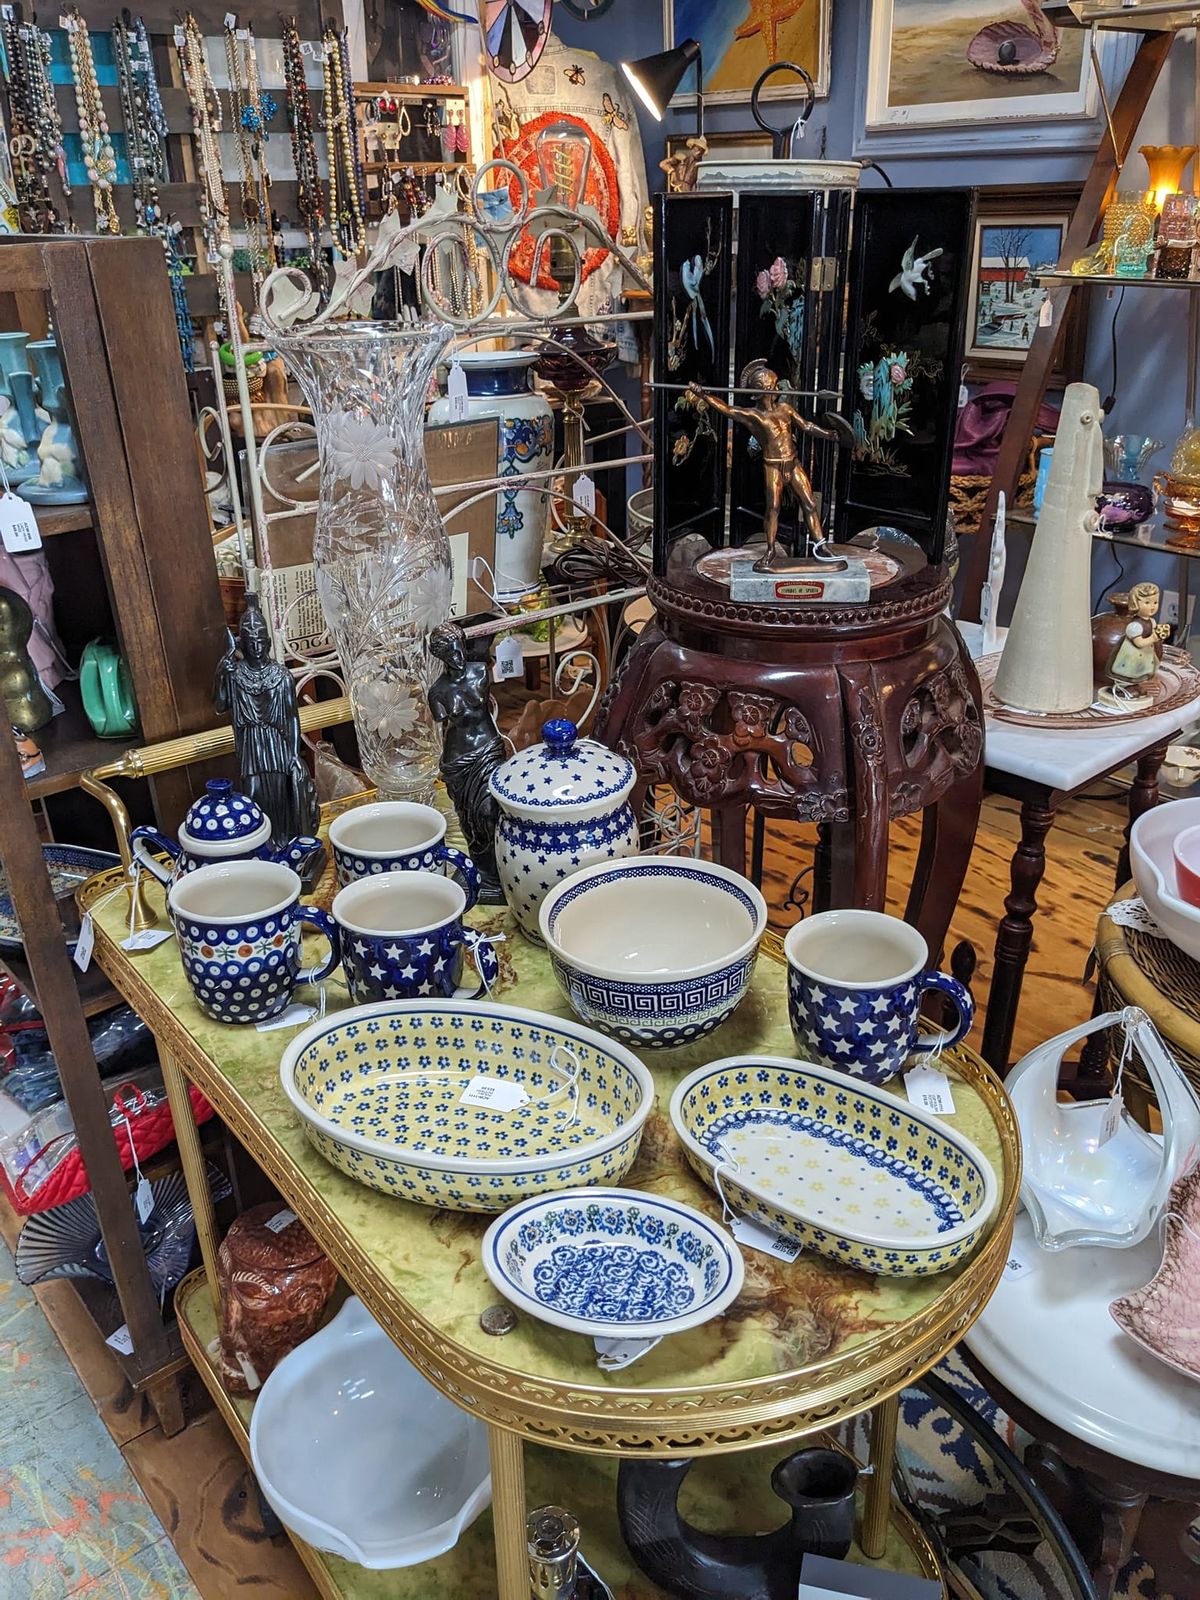 New Vintage Jewelry and Polish Pottery at Gypsybeach Treasured Kreations